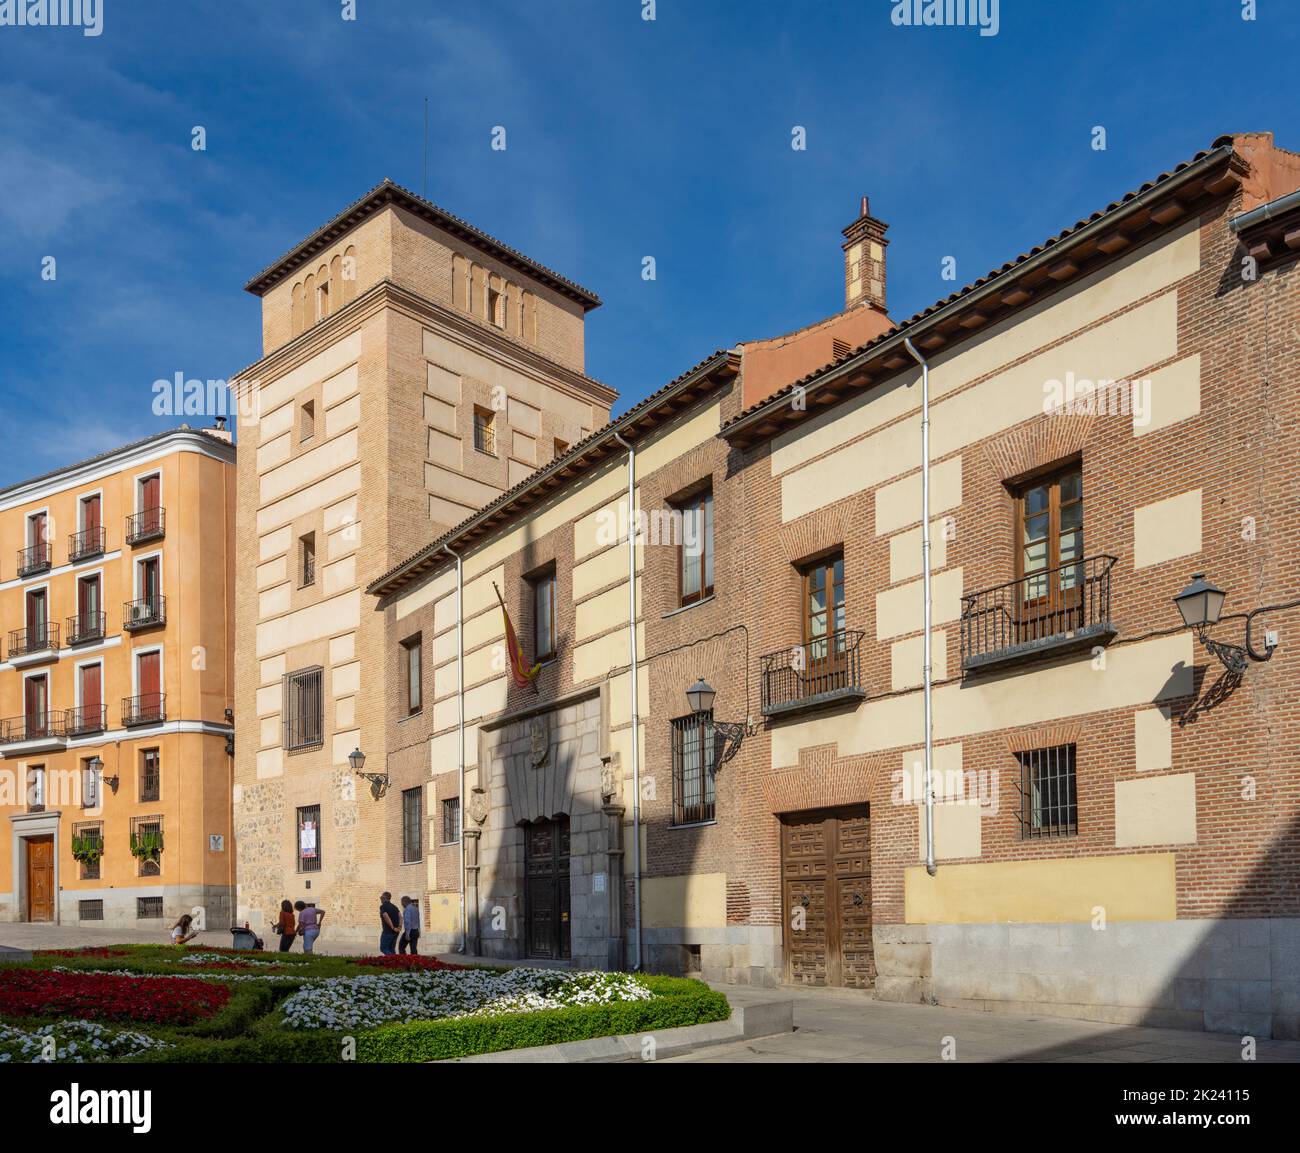 Madrid, Spain, September 2022. External view of the Royal Academy of Moral and Political Sciences building in the city center Stock Photo